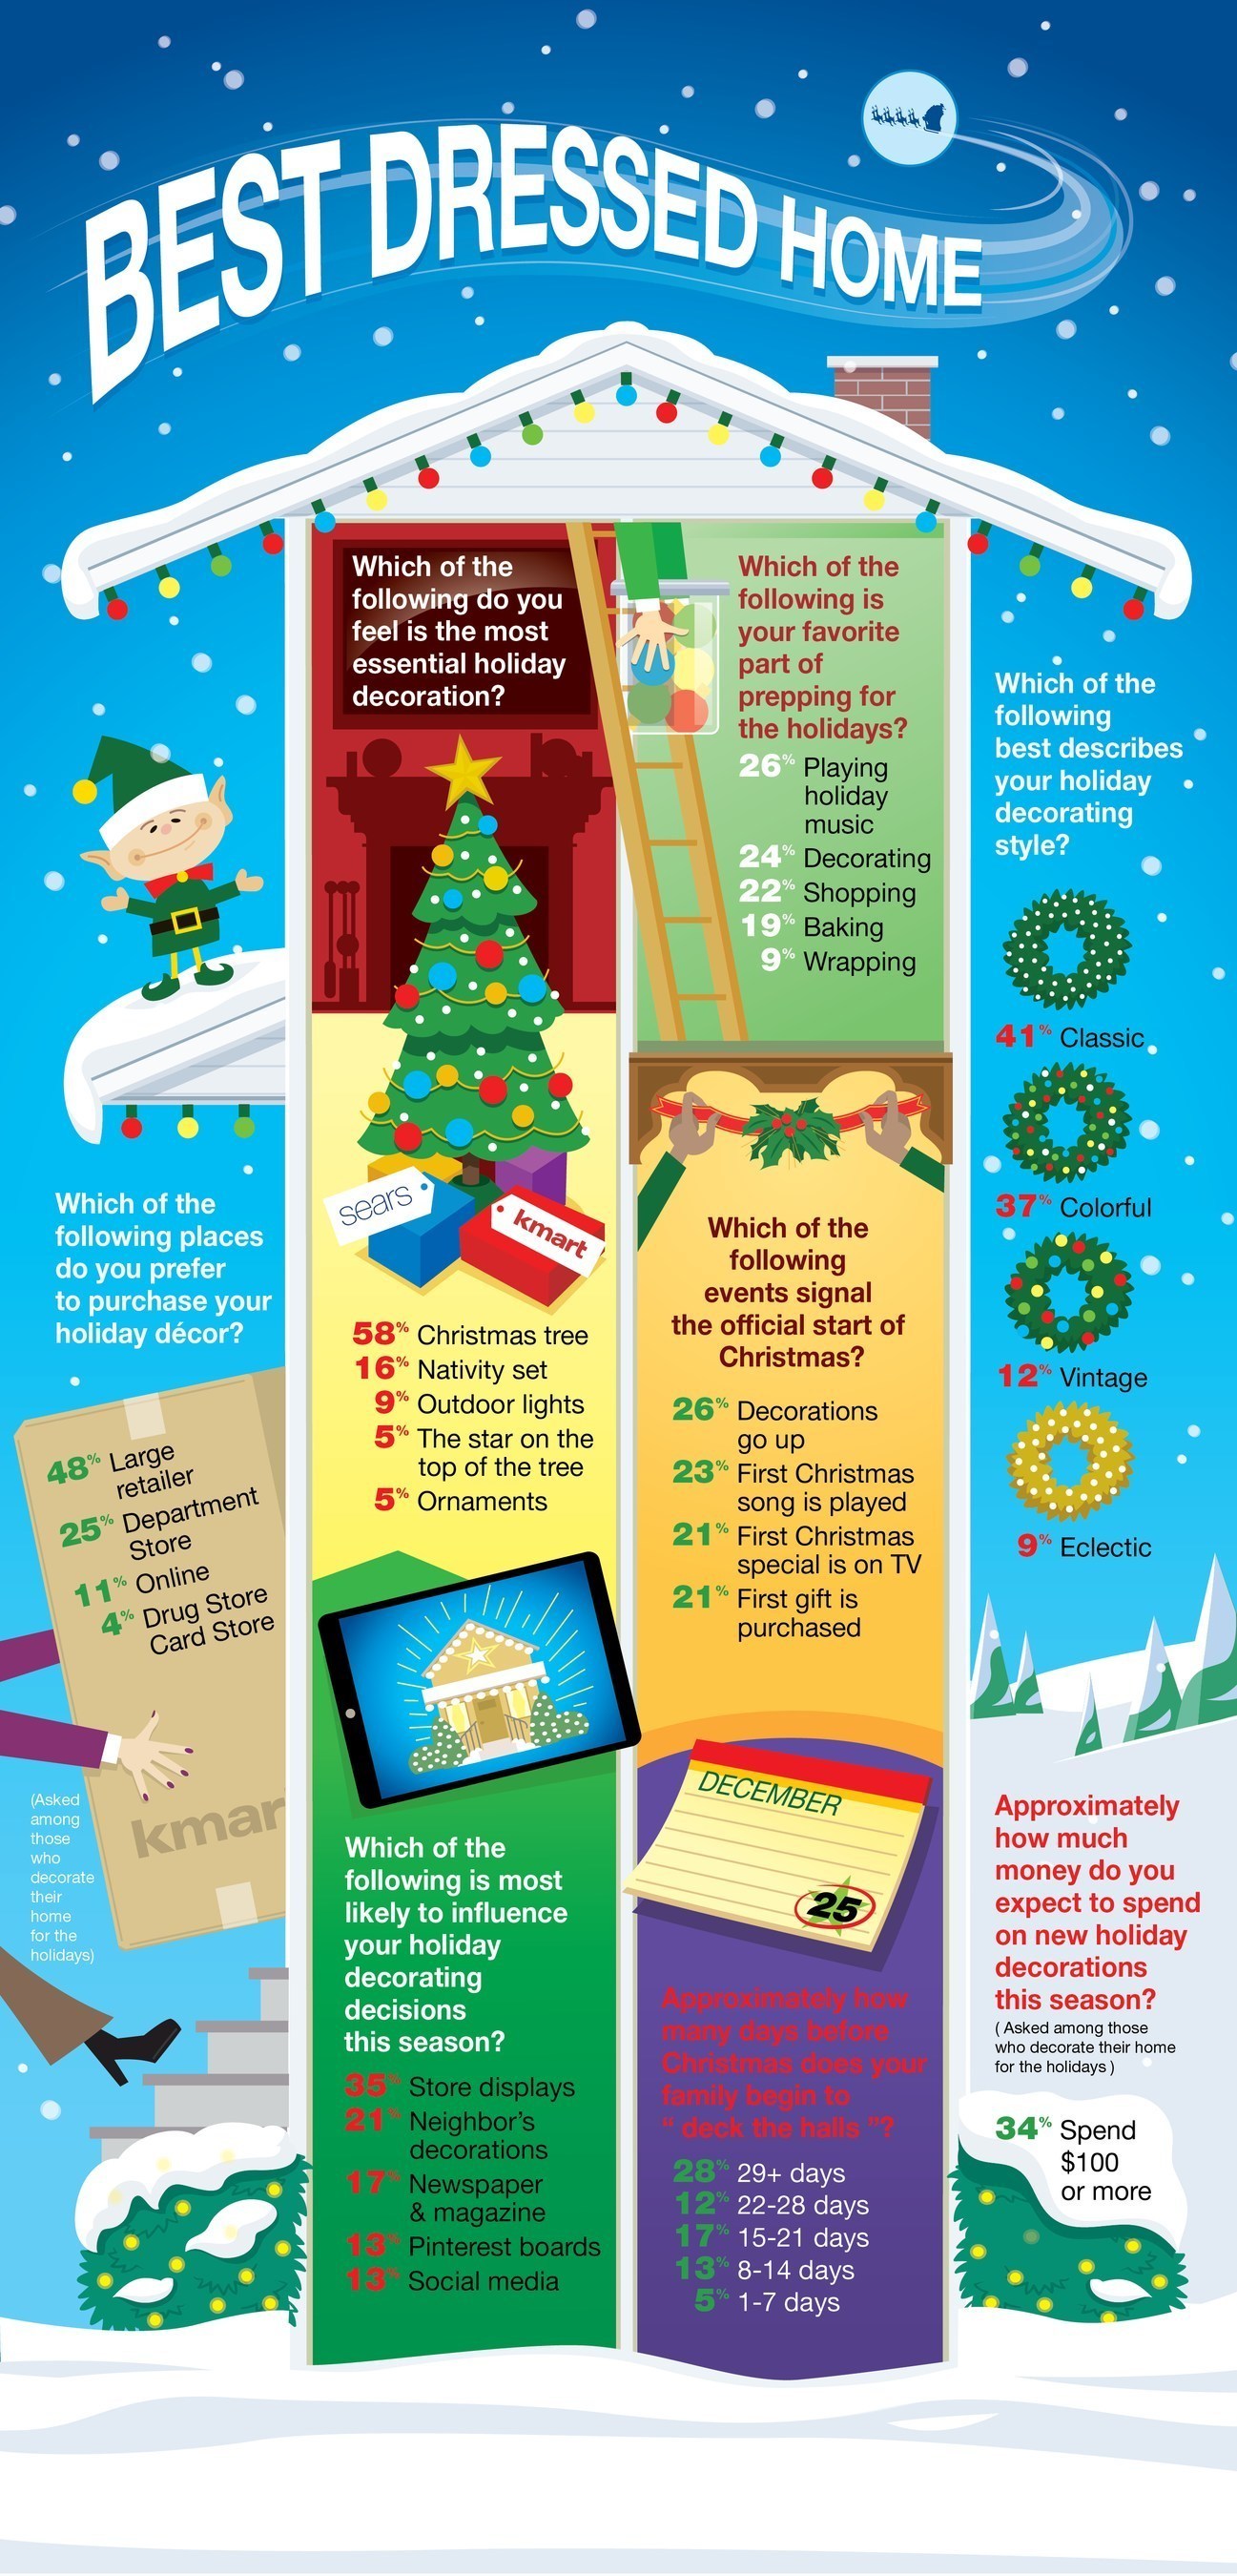 KMART AND SEARS SURVEY REVEALS SEASONAL DECORATING TRENDS FOR 2014